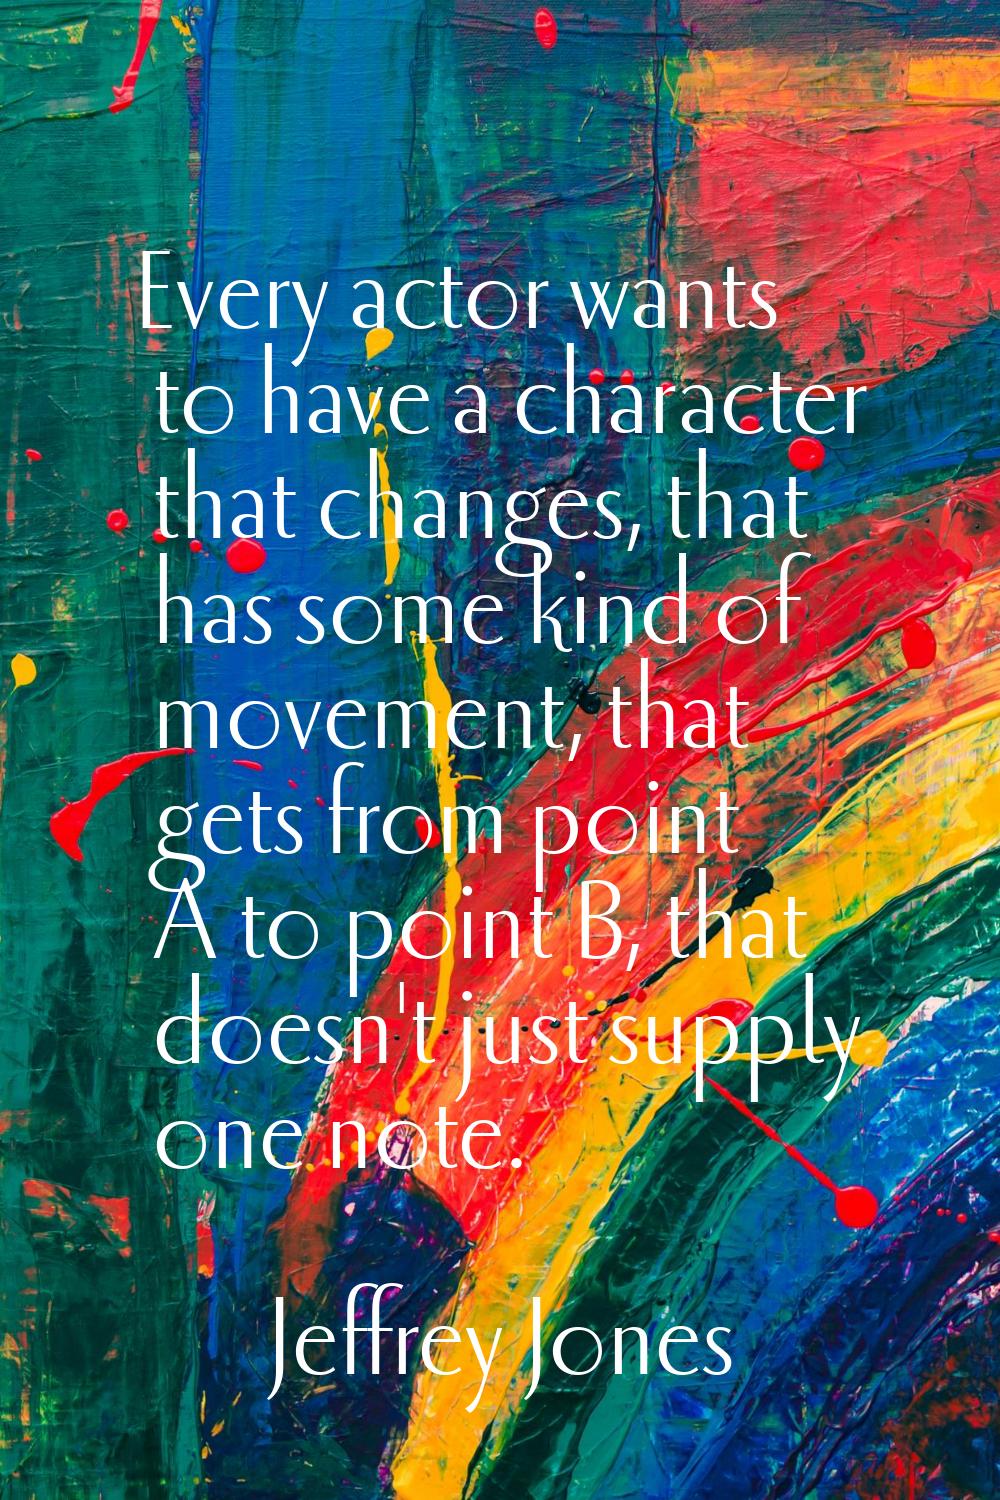 Every actor wants to have a character that changes, that has some kind of movement, that gets from 